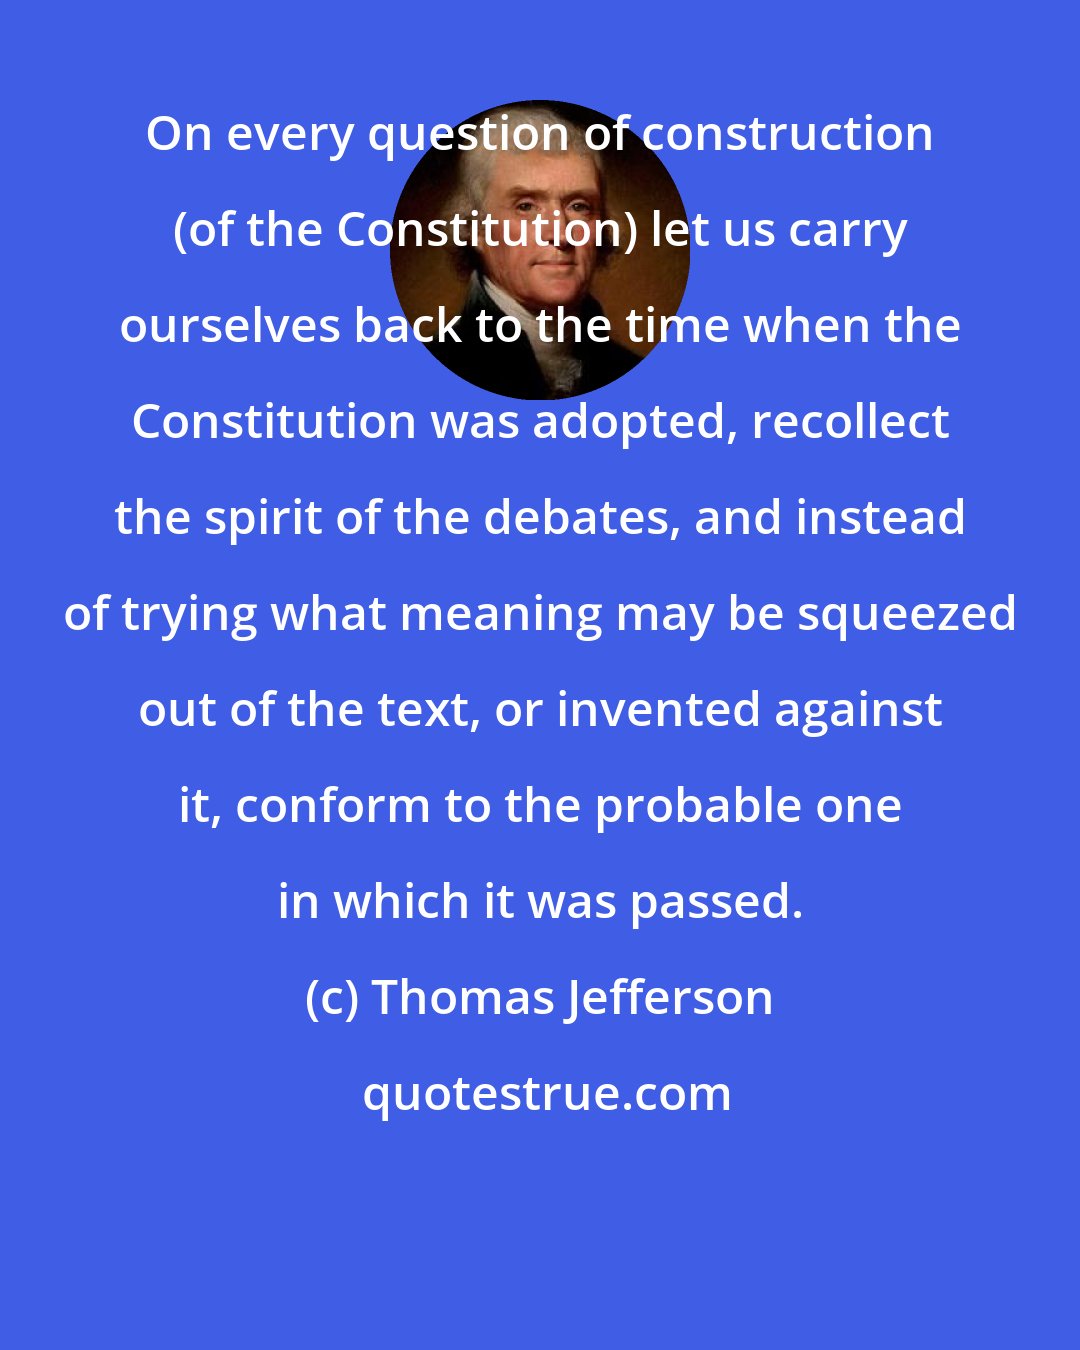 Thomas Jefferson: On every question of construction (of the Constitution) let us carry ourselves back to the time when the Constitution was adopted, recollect the spirit of the debates, and instead of trying what meaning may be squeezed out of the text, or invented against it, conform to the probable one in which it was passed.